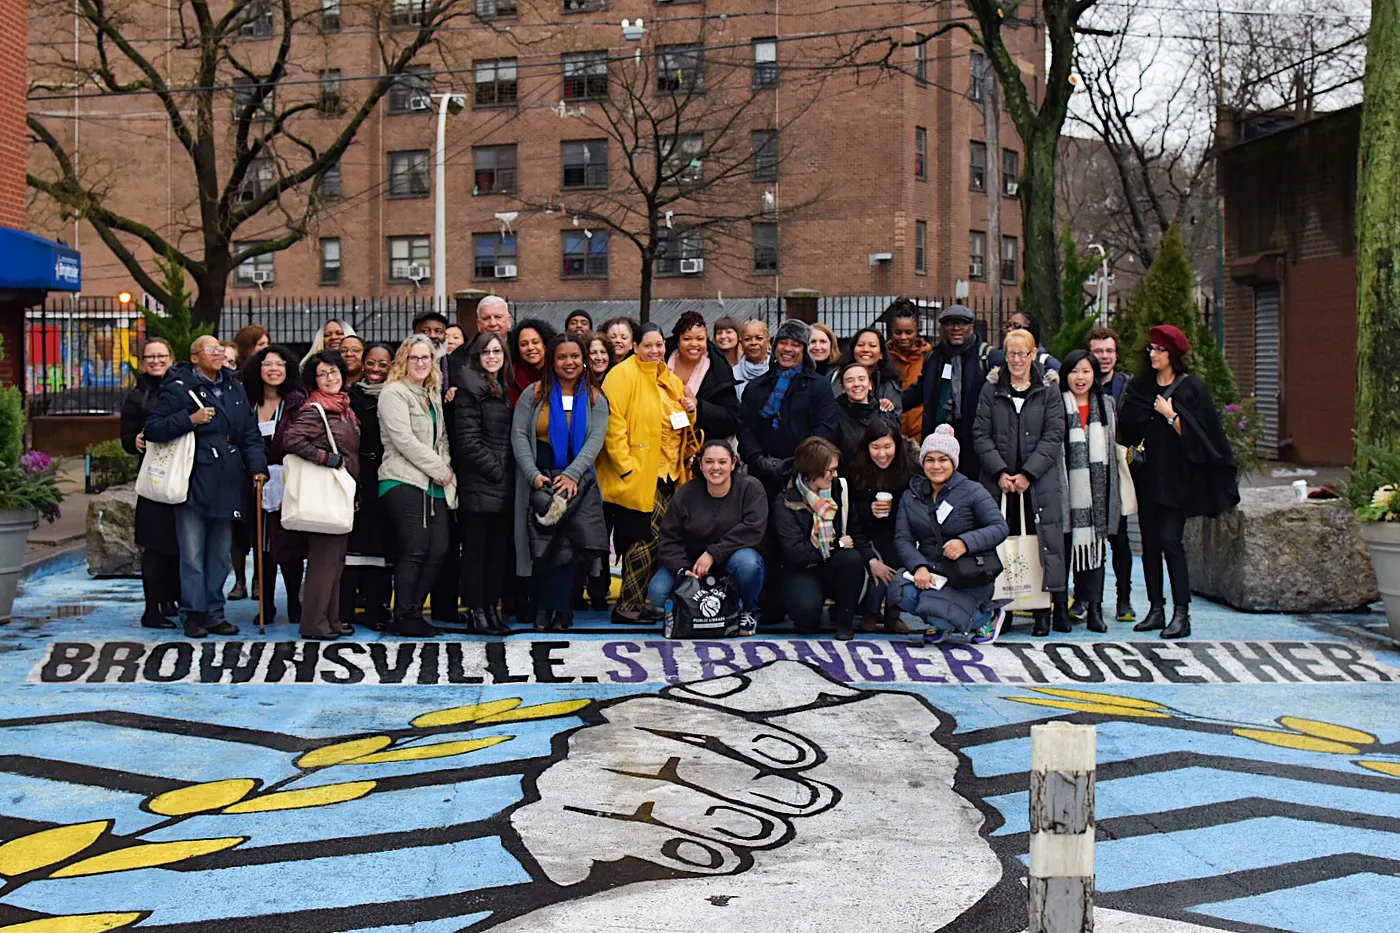 A large group of people posing for a photo in front of a painted mural on a sidewalk reading 